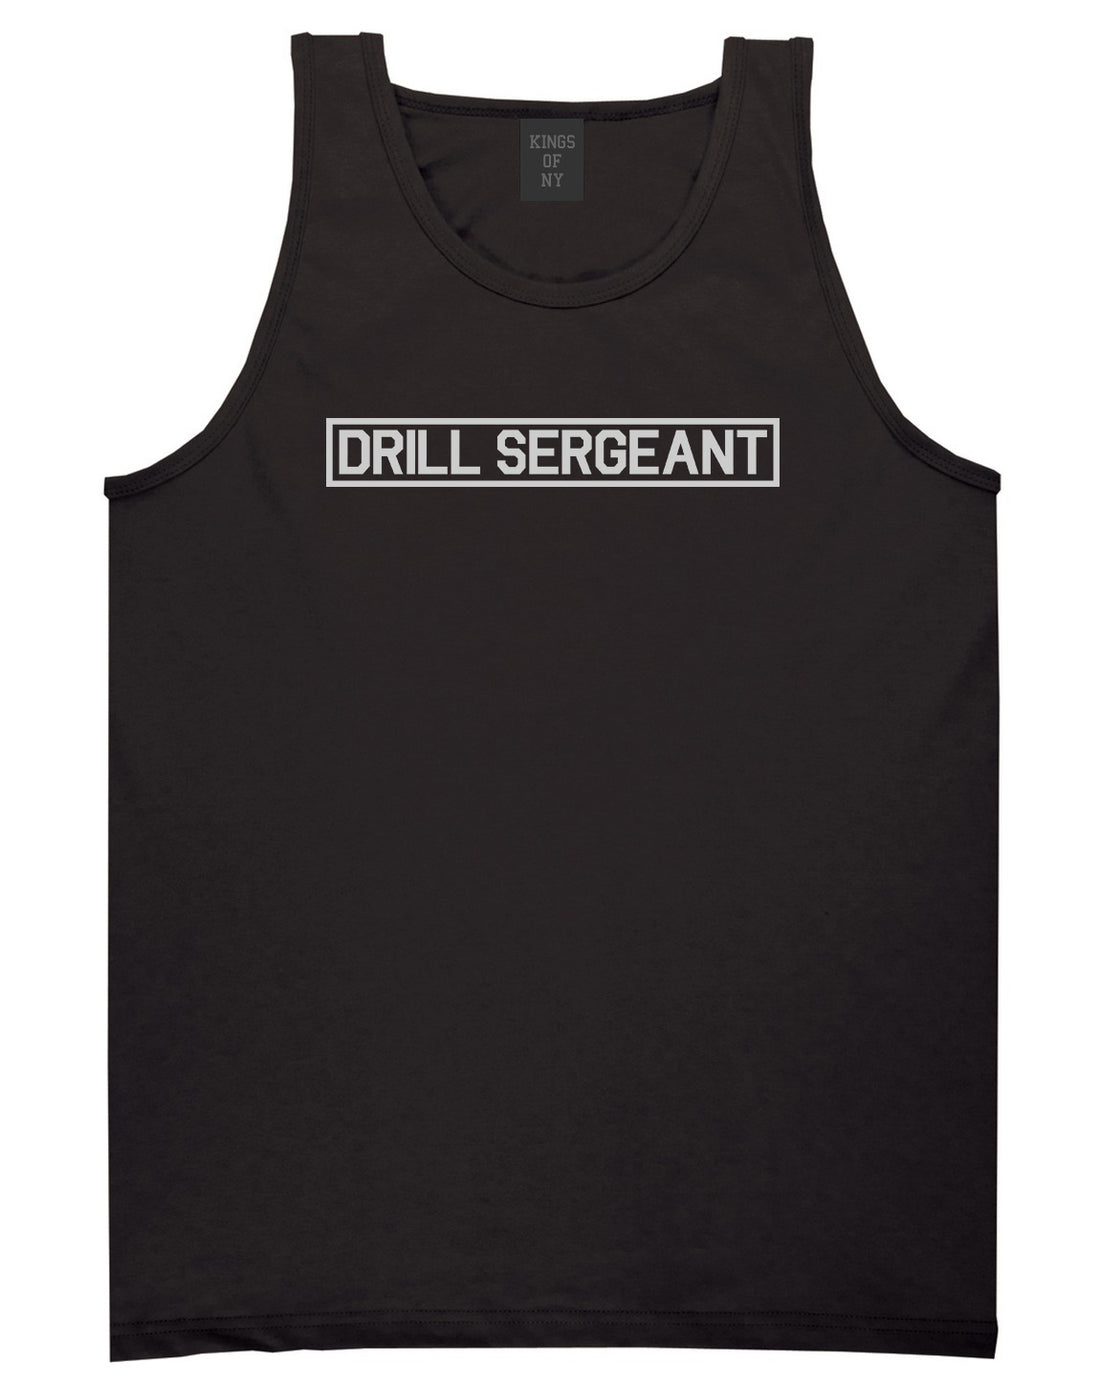 Drill_Sergeant_Sgt Mens Black Tank Top Shirt by Kings Of NY